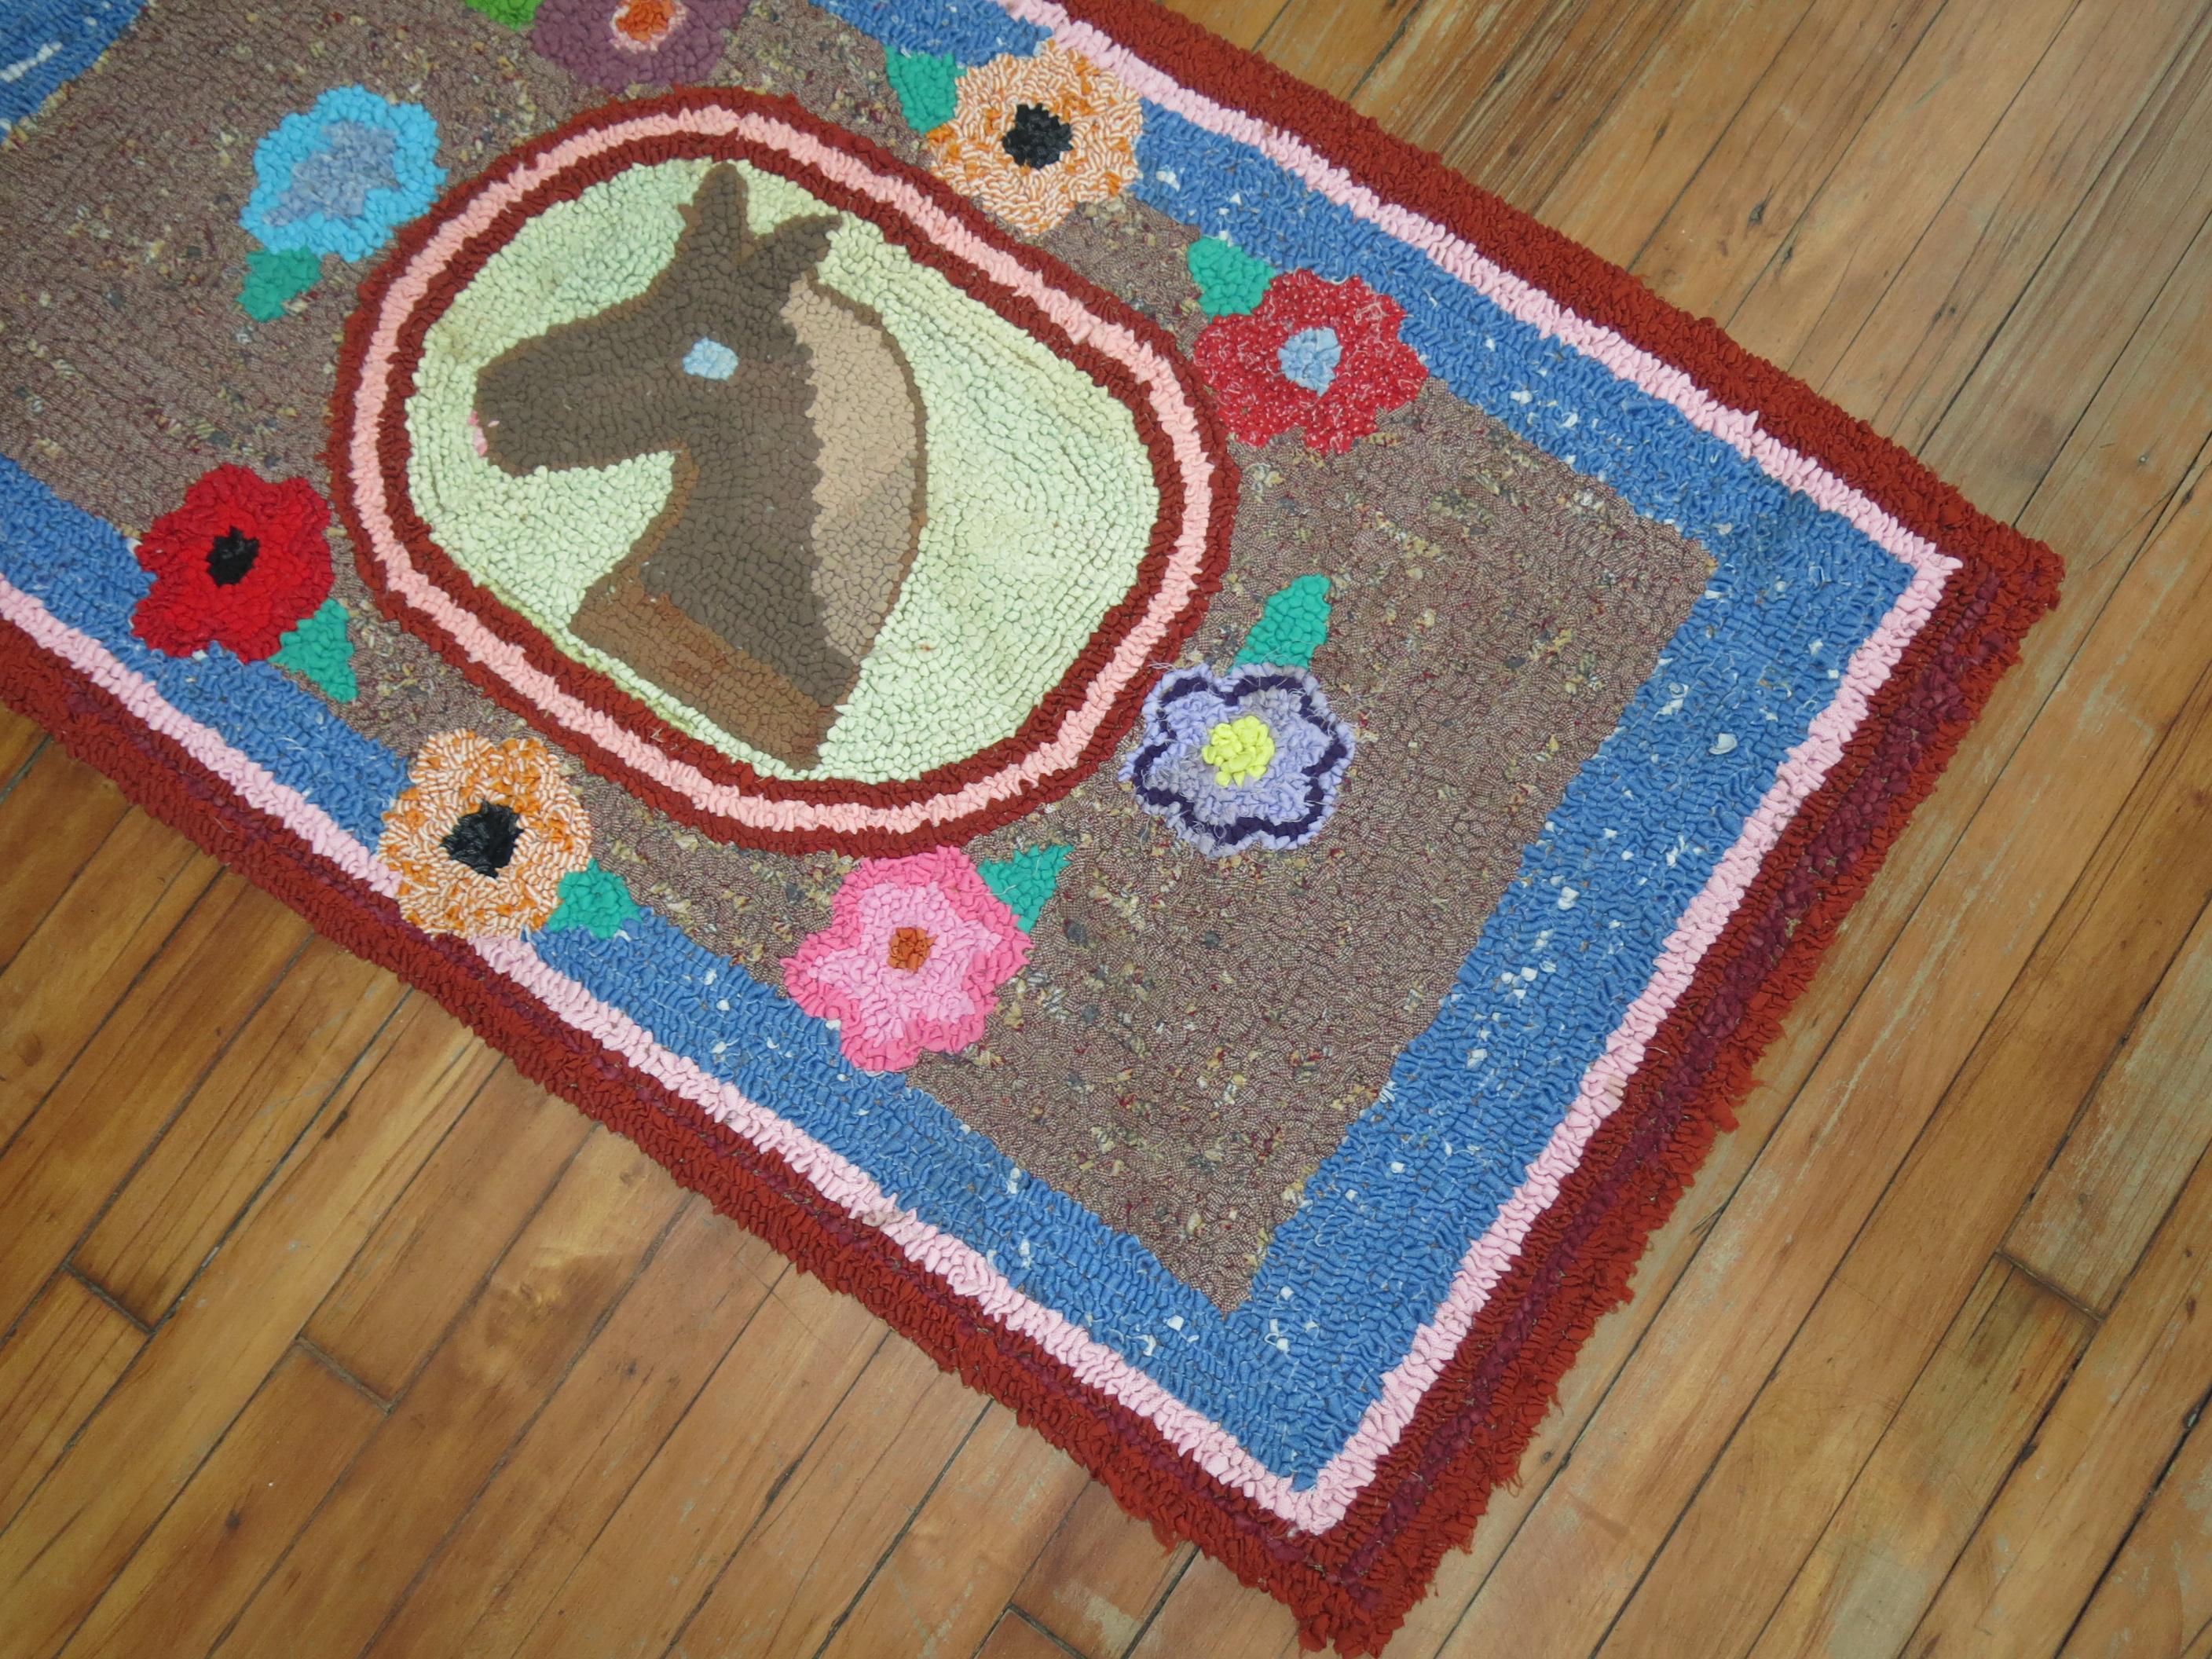 A handmade American Hooked rug from the early part of the 20th century depicting a horses face surrounded by flowers. No stains, no tears, has been professionally cleaned. Backed with blue fabric.